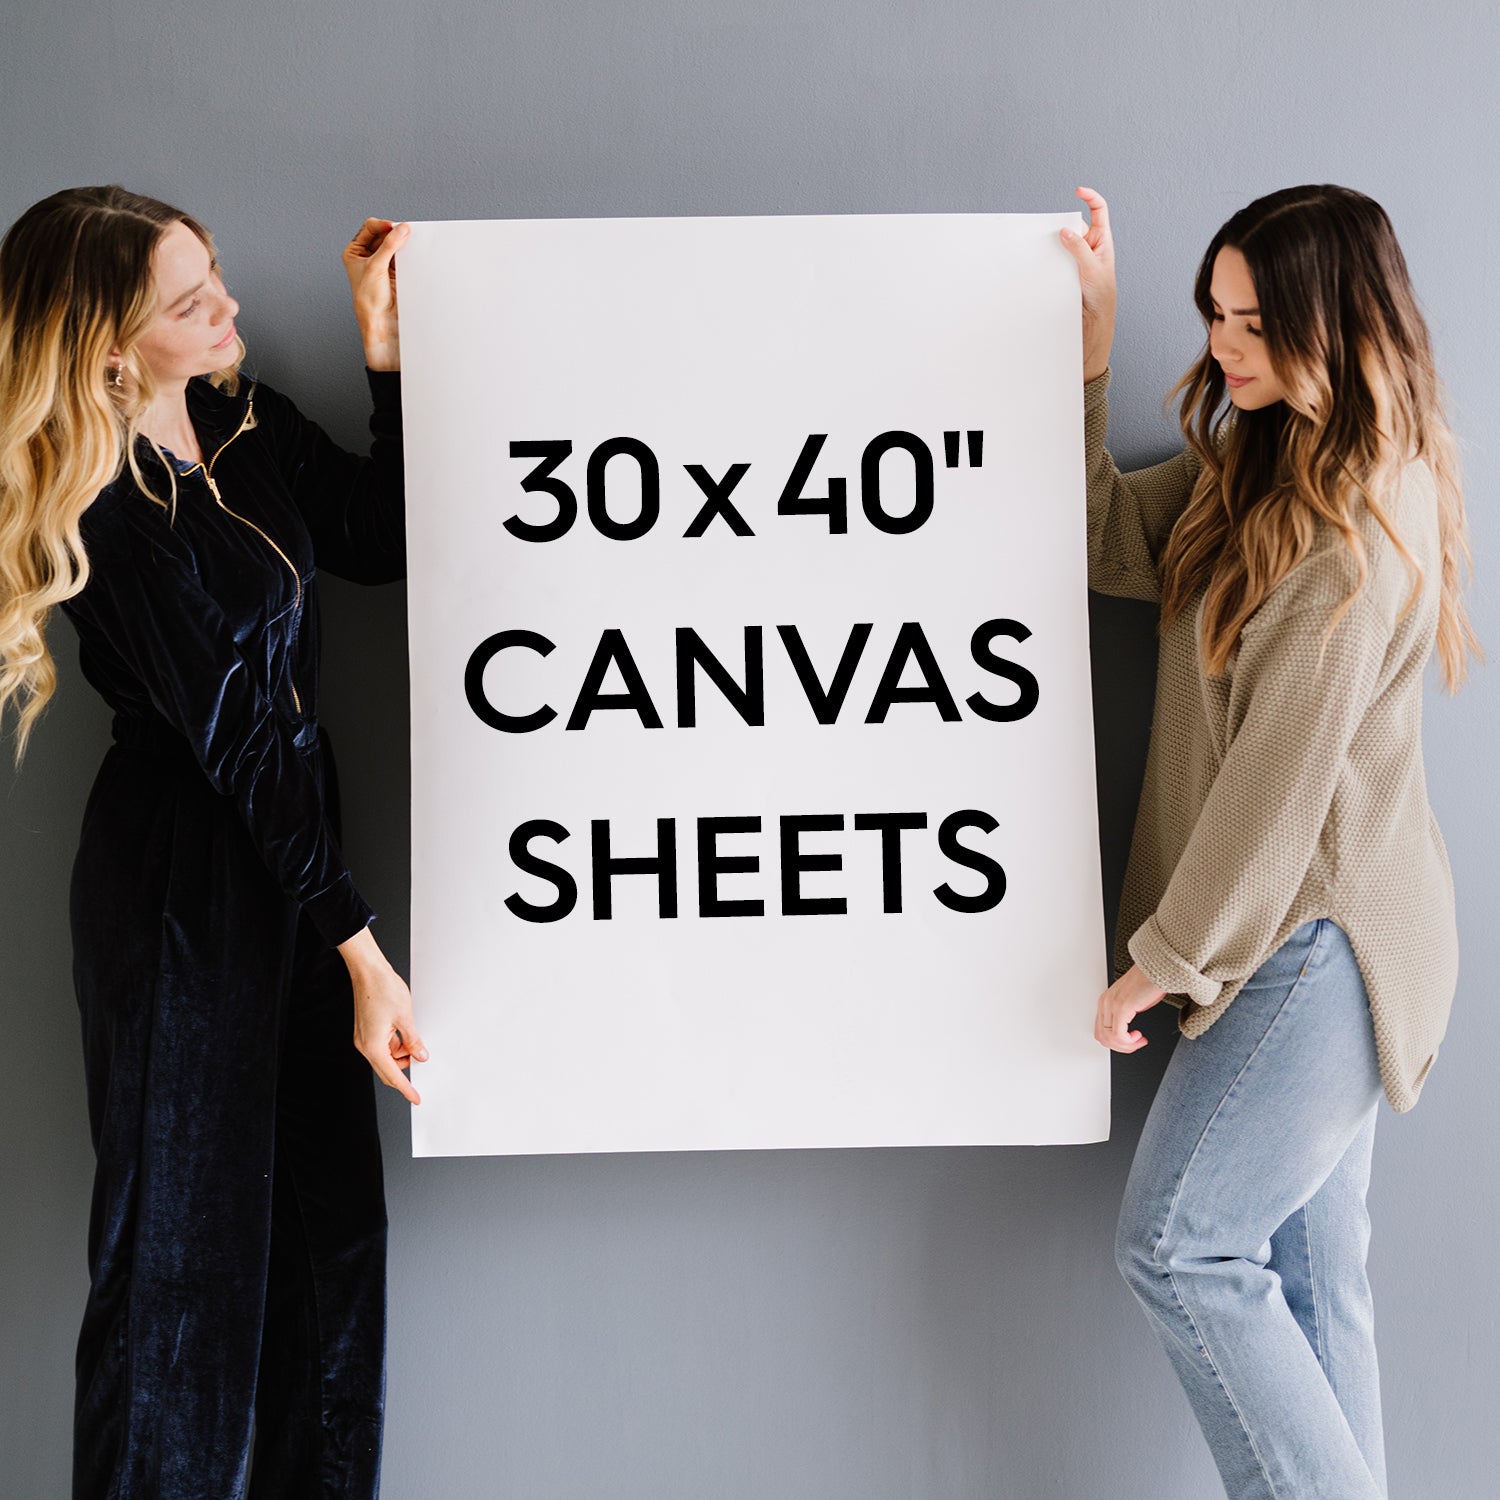 30x40 Big Painting Canvas - Rolled 100% Cotton Canvas Sheets